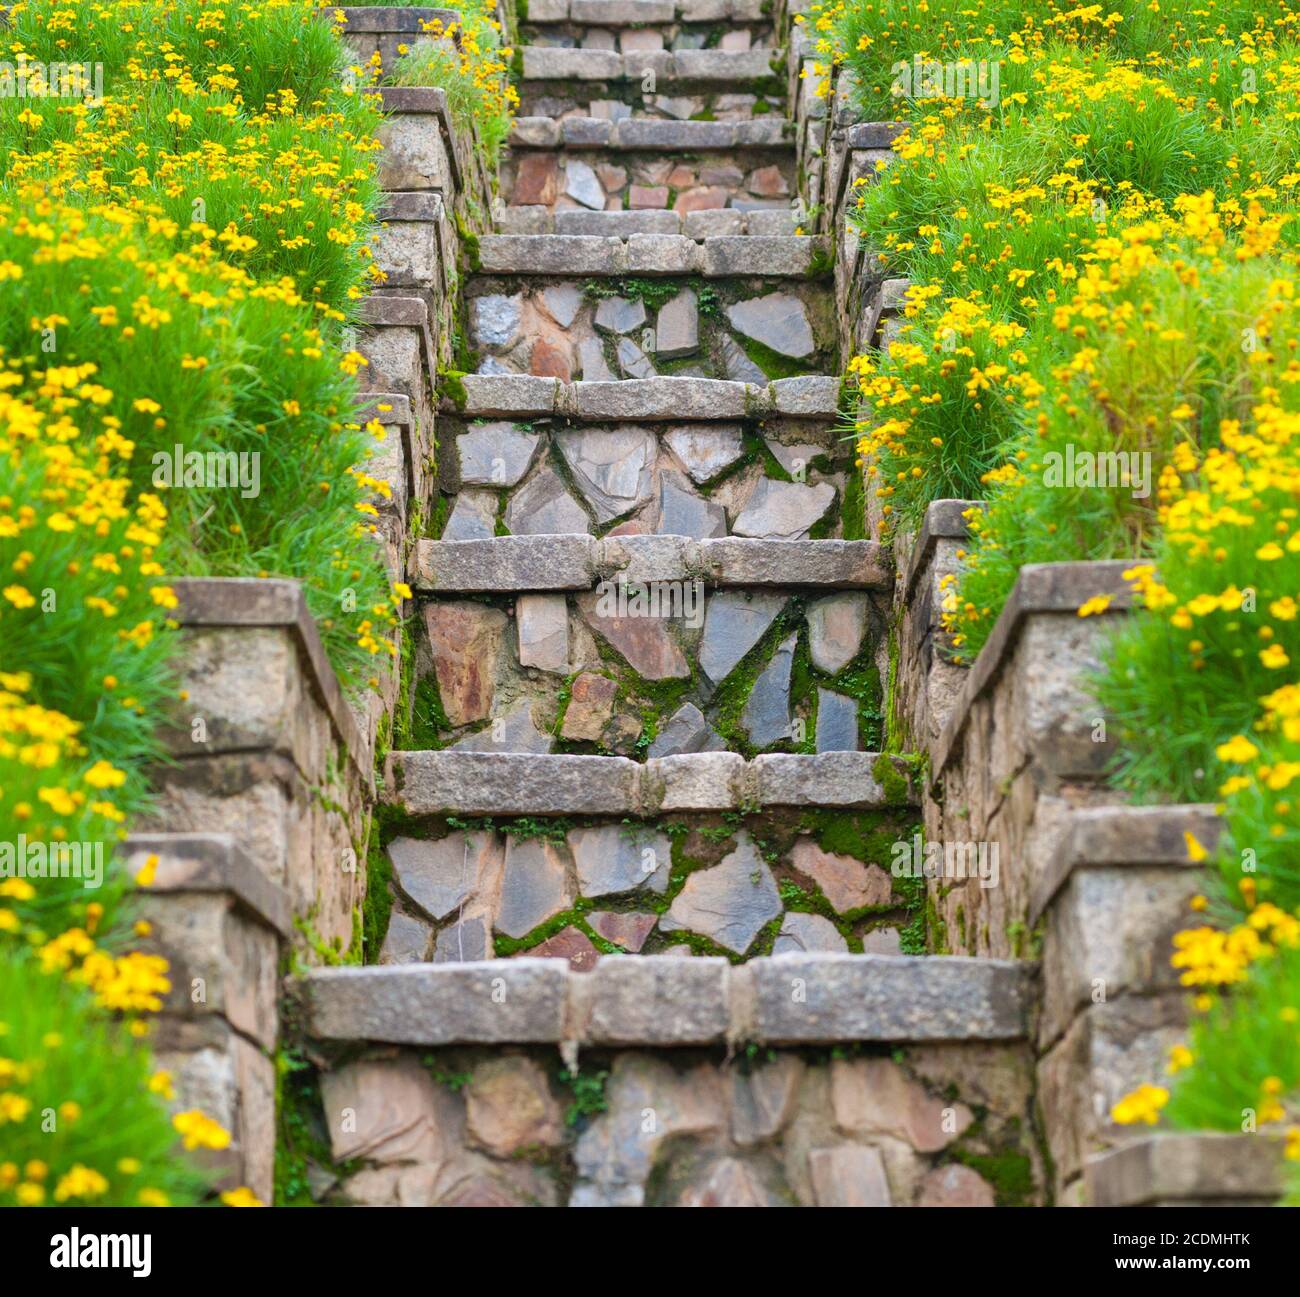 mossy stone staircase among yellow flowers Stock Photo